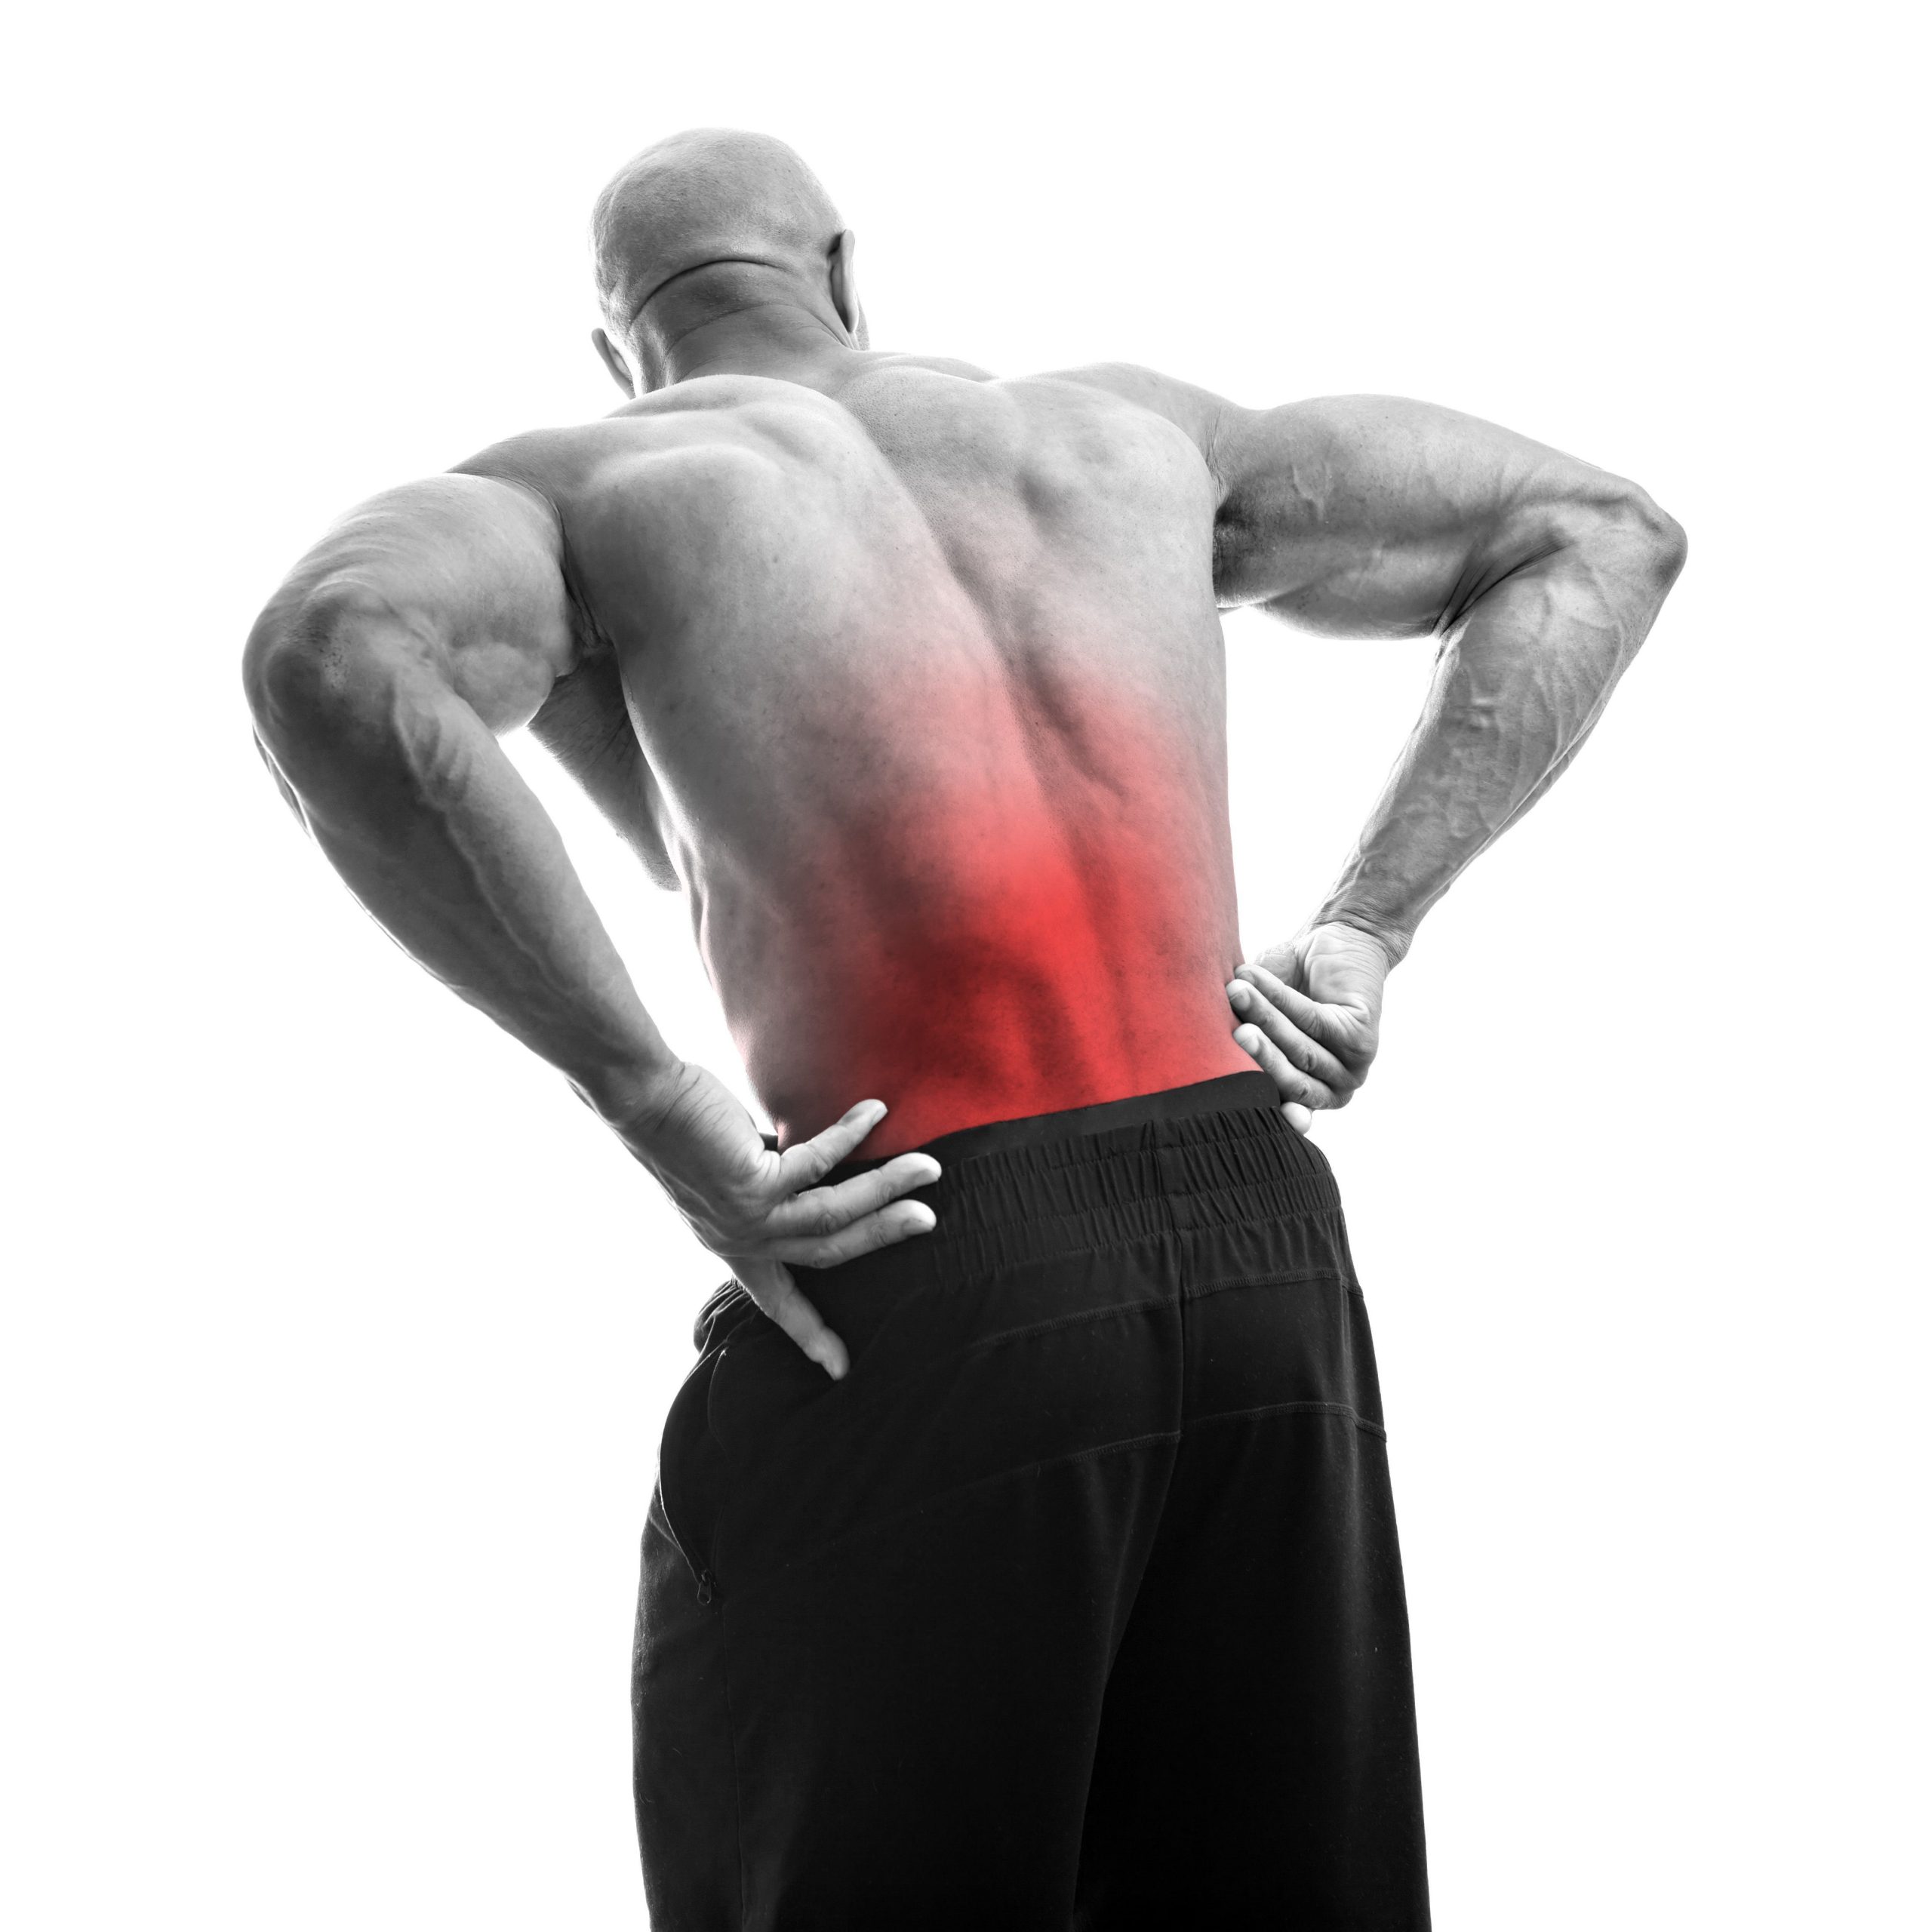 Pin on Back Pain Tips 101